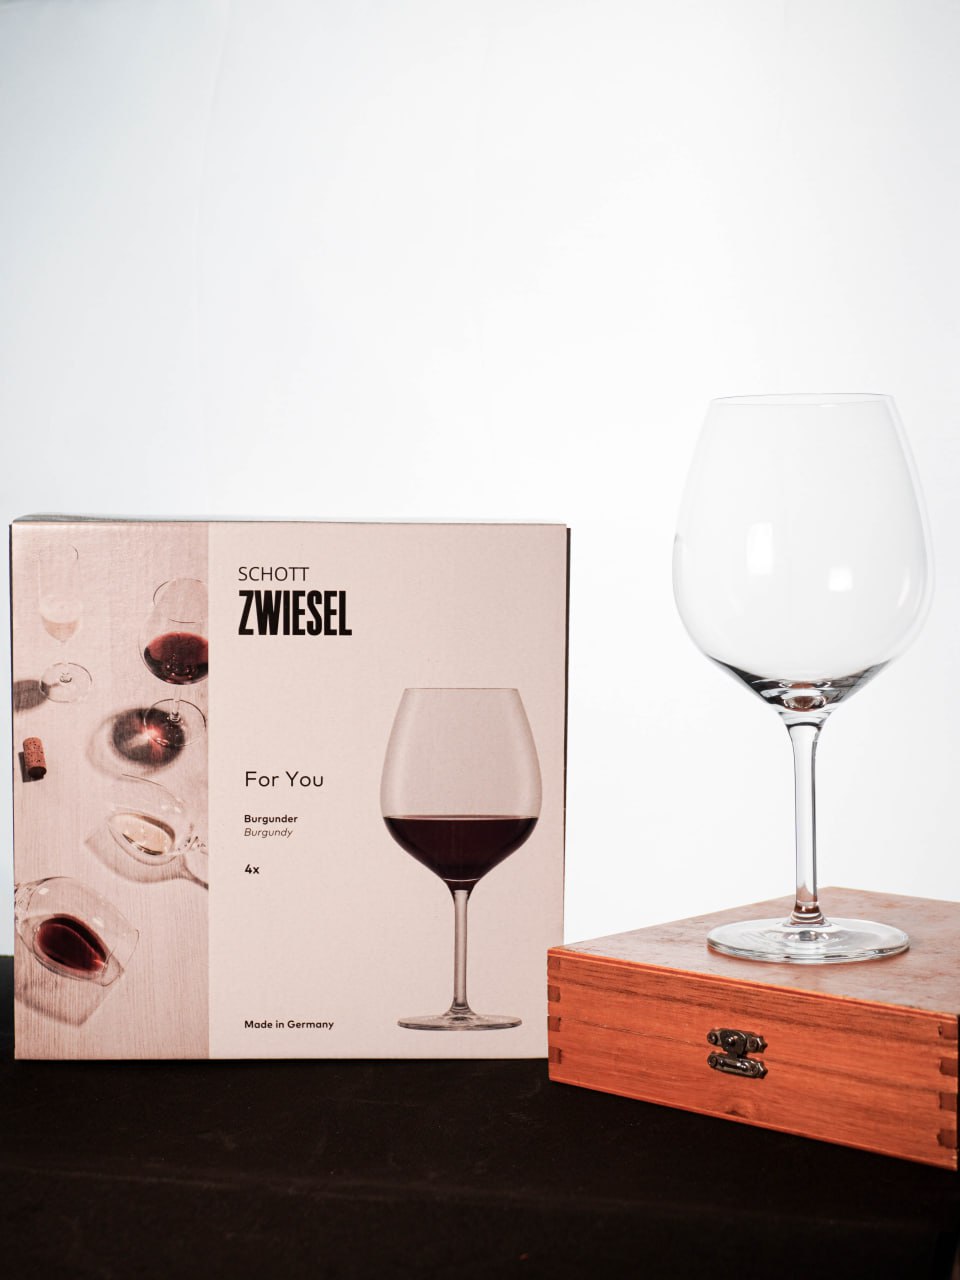 Bộ 4 ly vang đỏ Burgunder Schott Zwiesel 121870 For You 4pcs.gift box- made in Germany